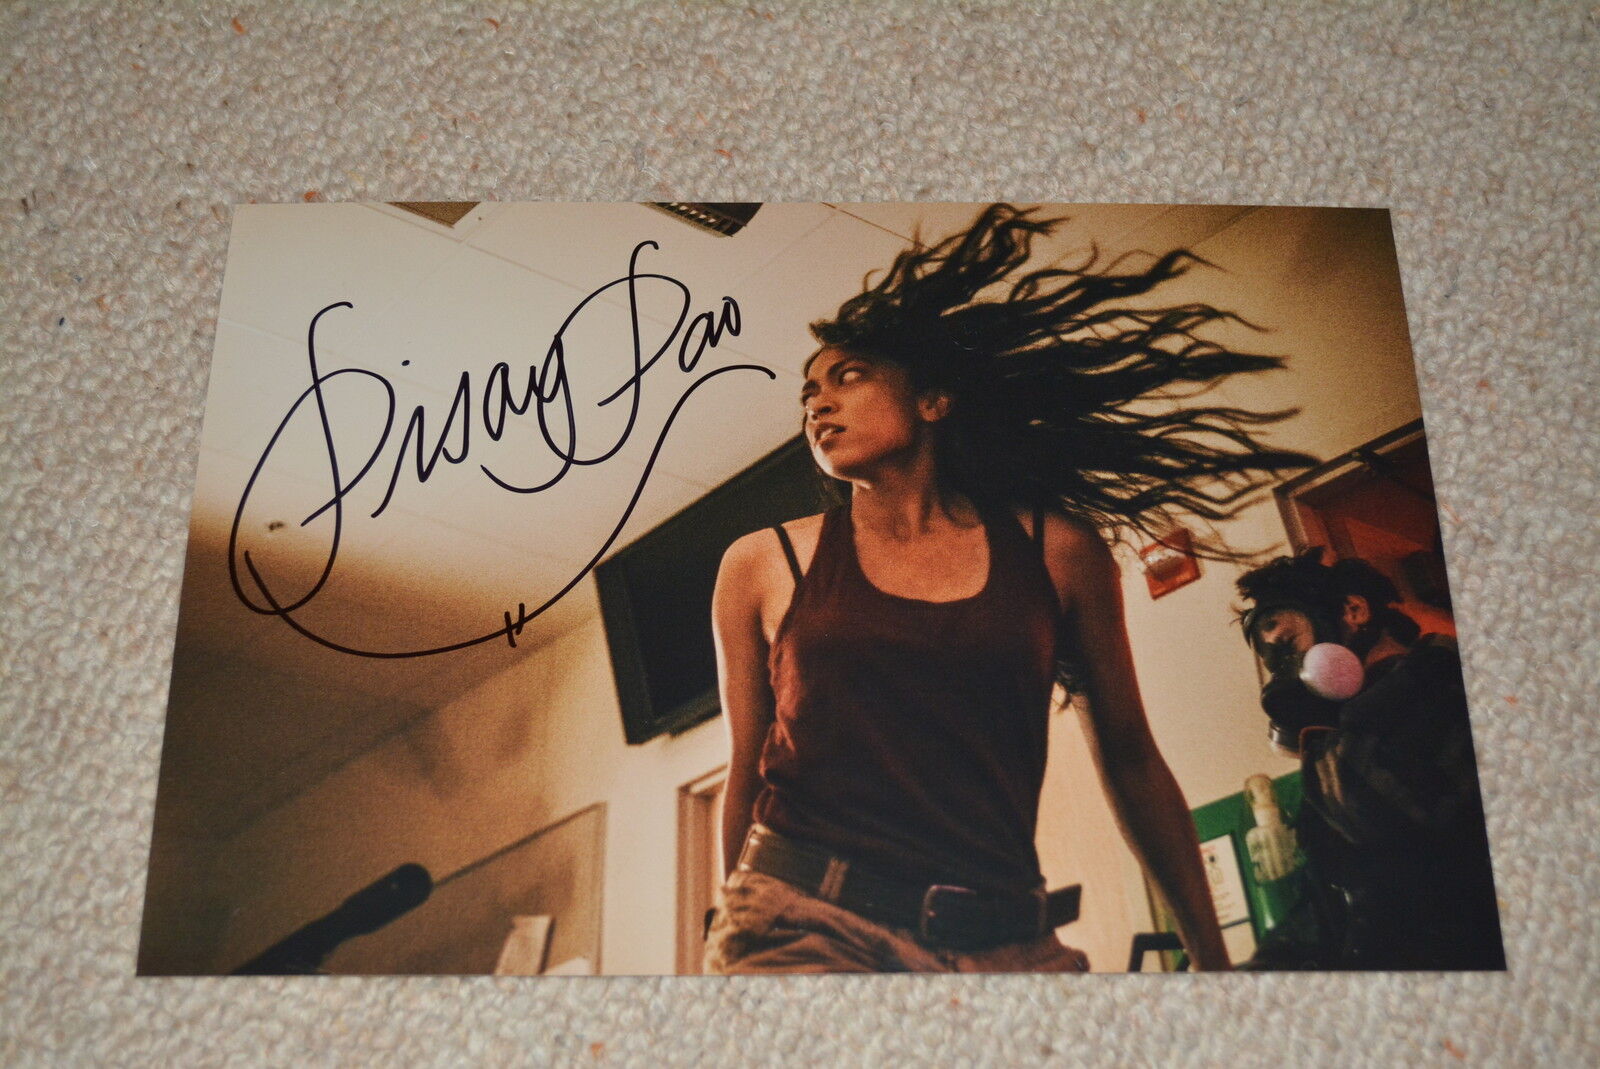 PISAY PAO signed autograph In Person 8x12 (20x30 cm) Z NATION